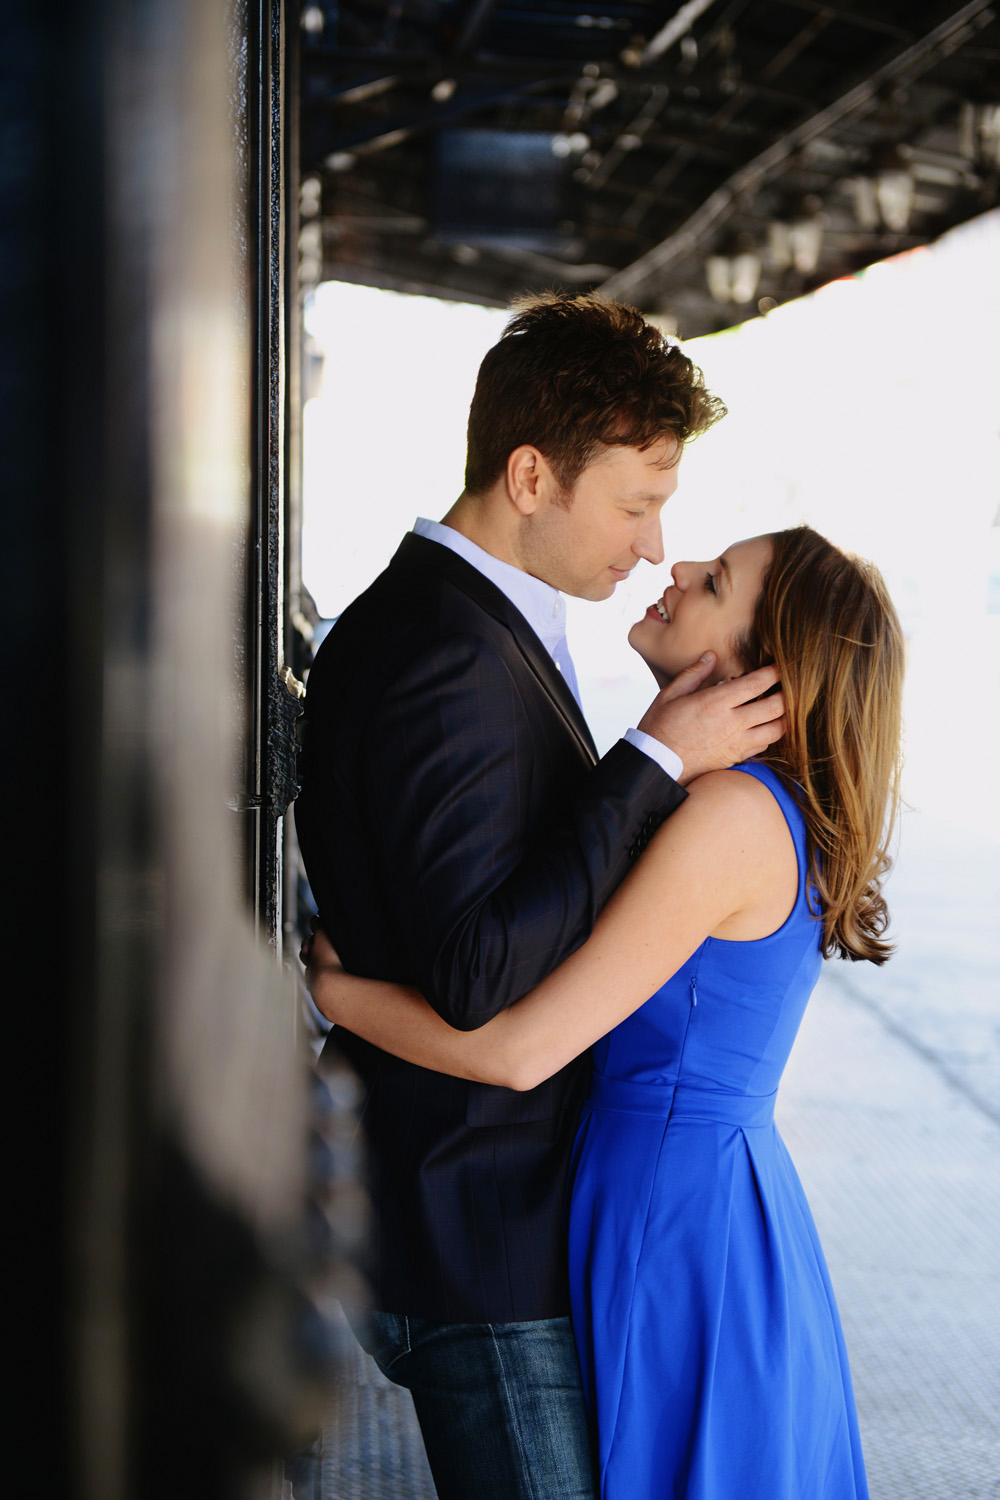 Engagement photos taken in Grand Central & Meatpacking District New York by Engagement Photographers NYC XOANDREA